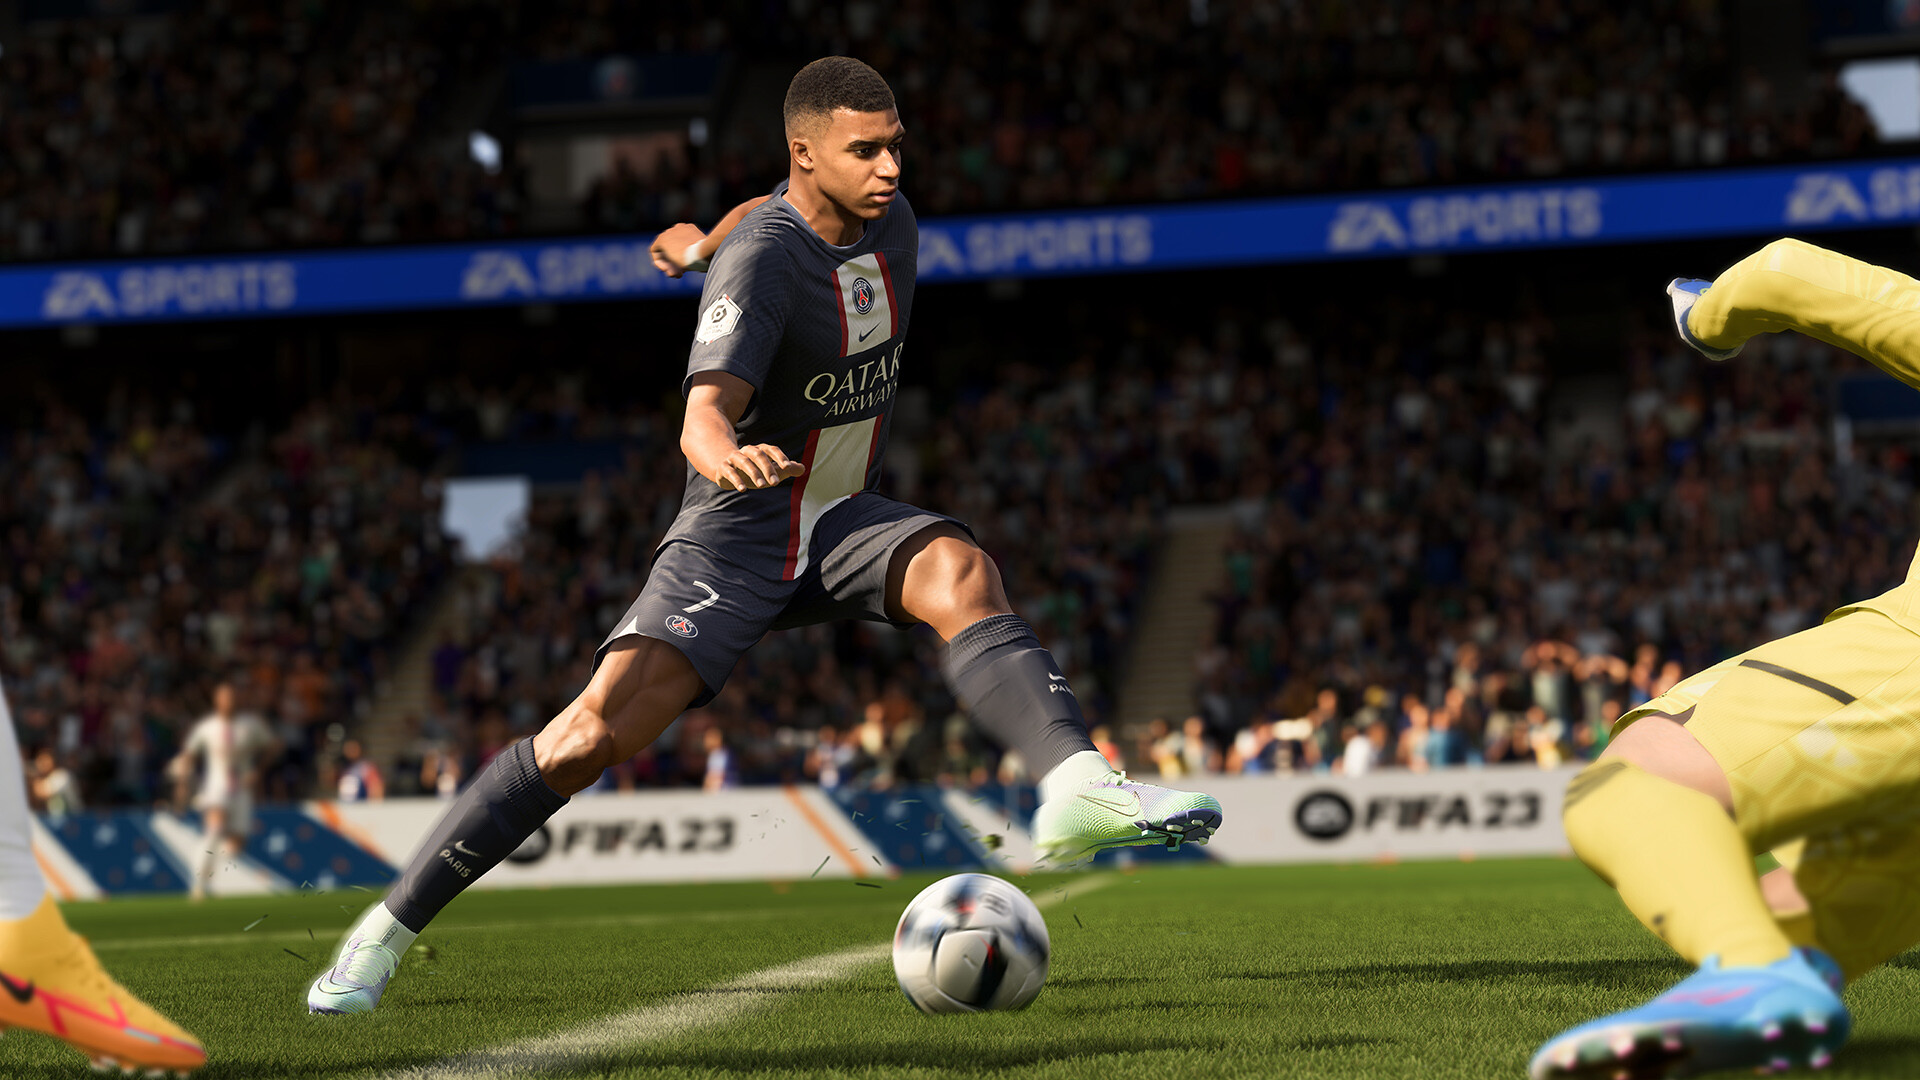 EA SPORTS™ FIFA 21 Steam Charts - Live Player Count